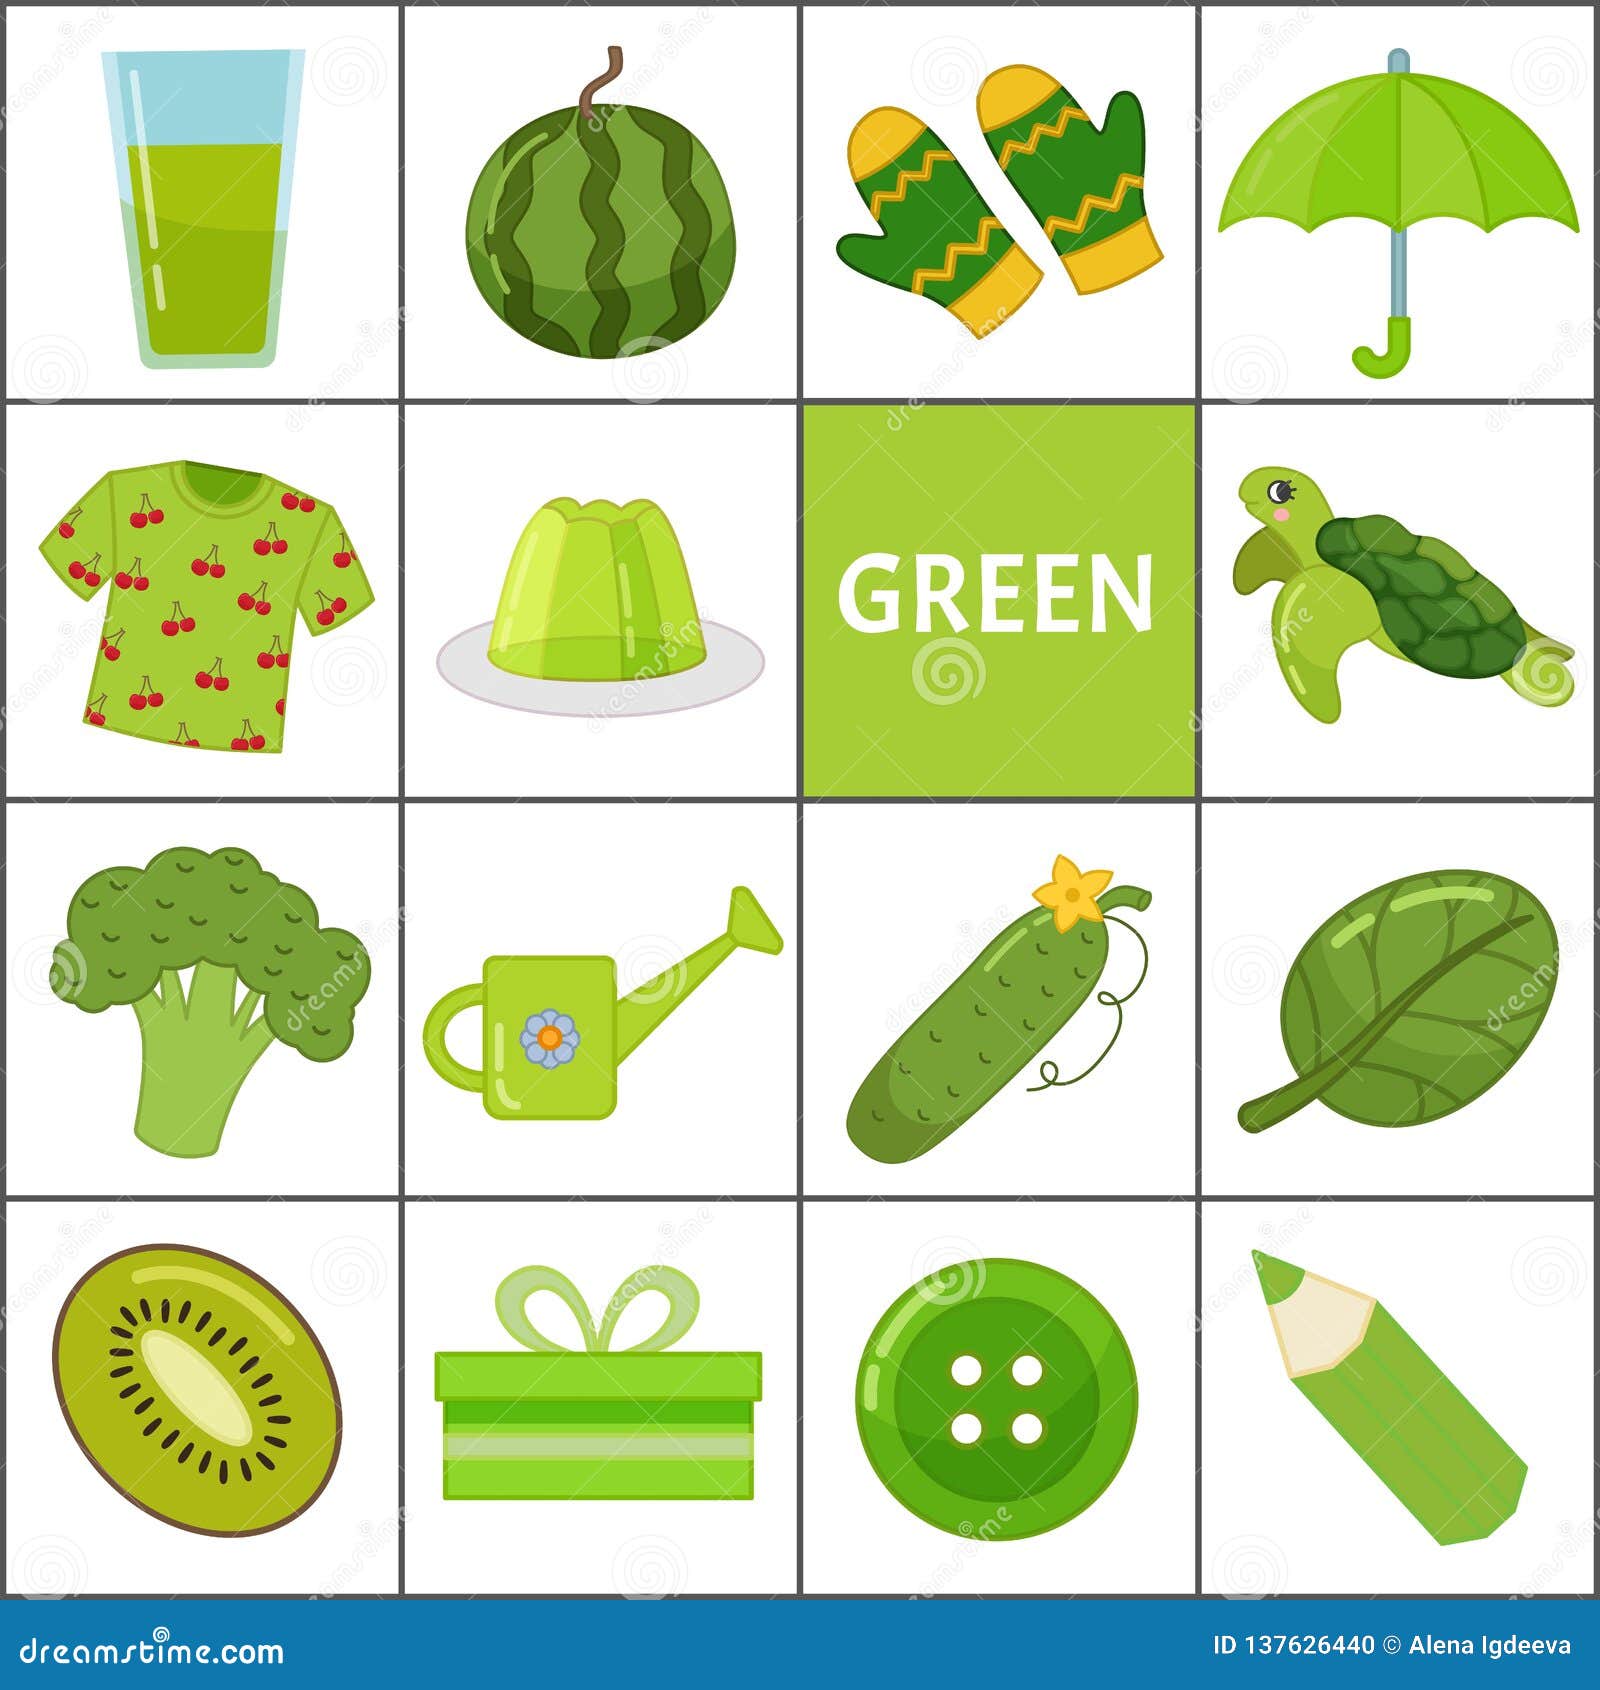 Printable Learning Materials For Kids